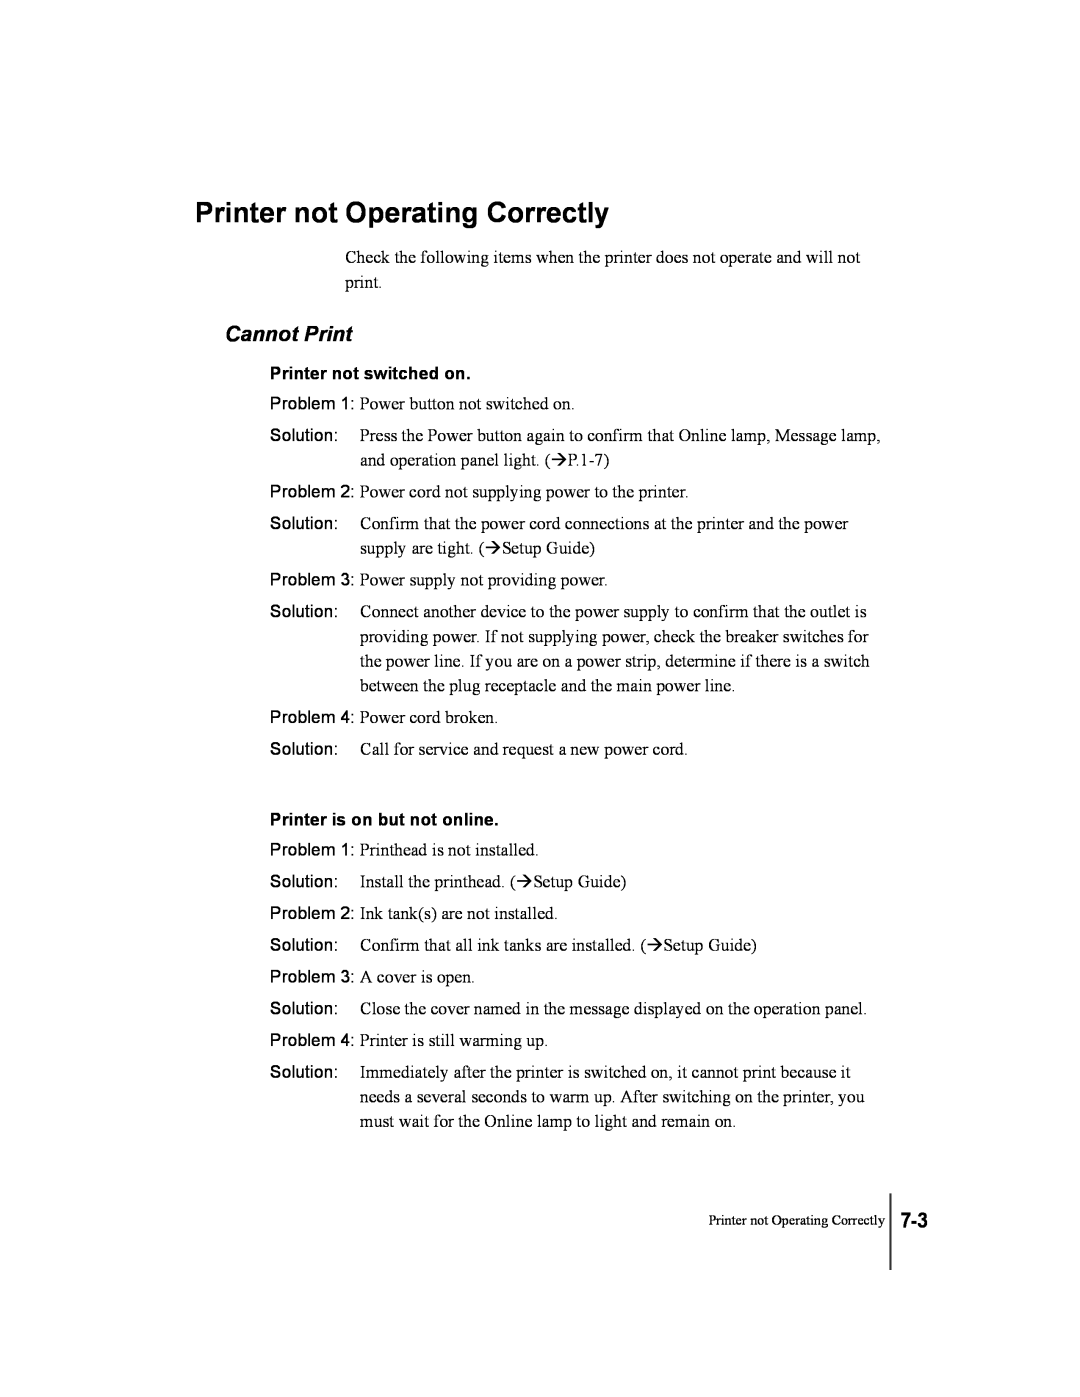 Canon W2200 manual Printer not Operating Correctly, Cannot Print, Printer not switched on, Printer is on but not online 